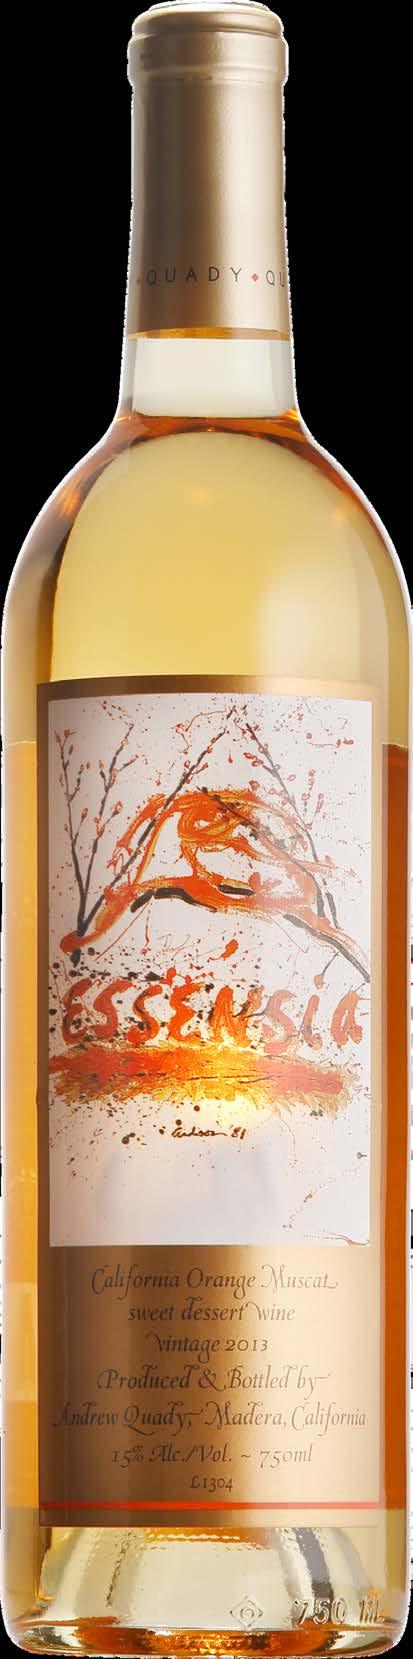 Editors Choice 90 POINTS 2013 ESSENSIA "Sweet and nicely mature, this wine has a bold orangegold color that matches the intense honeyed pear and candiedpecan